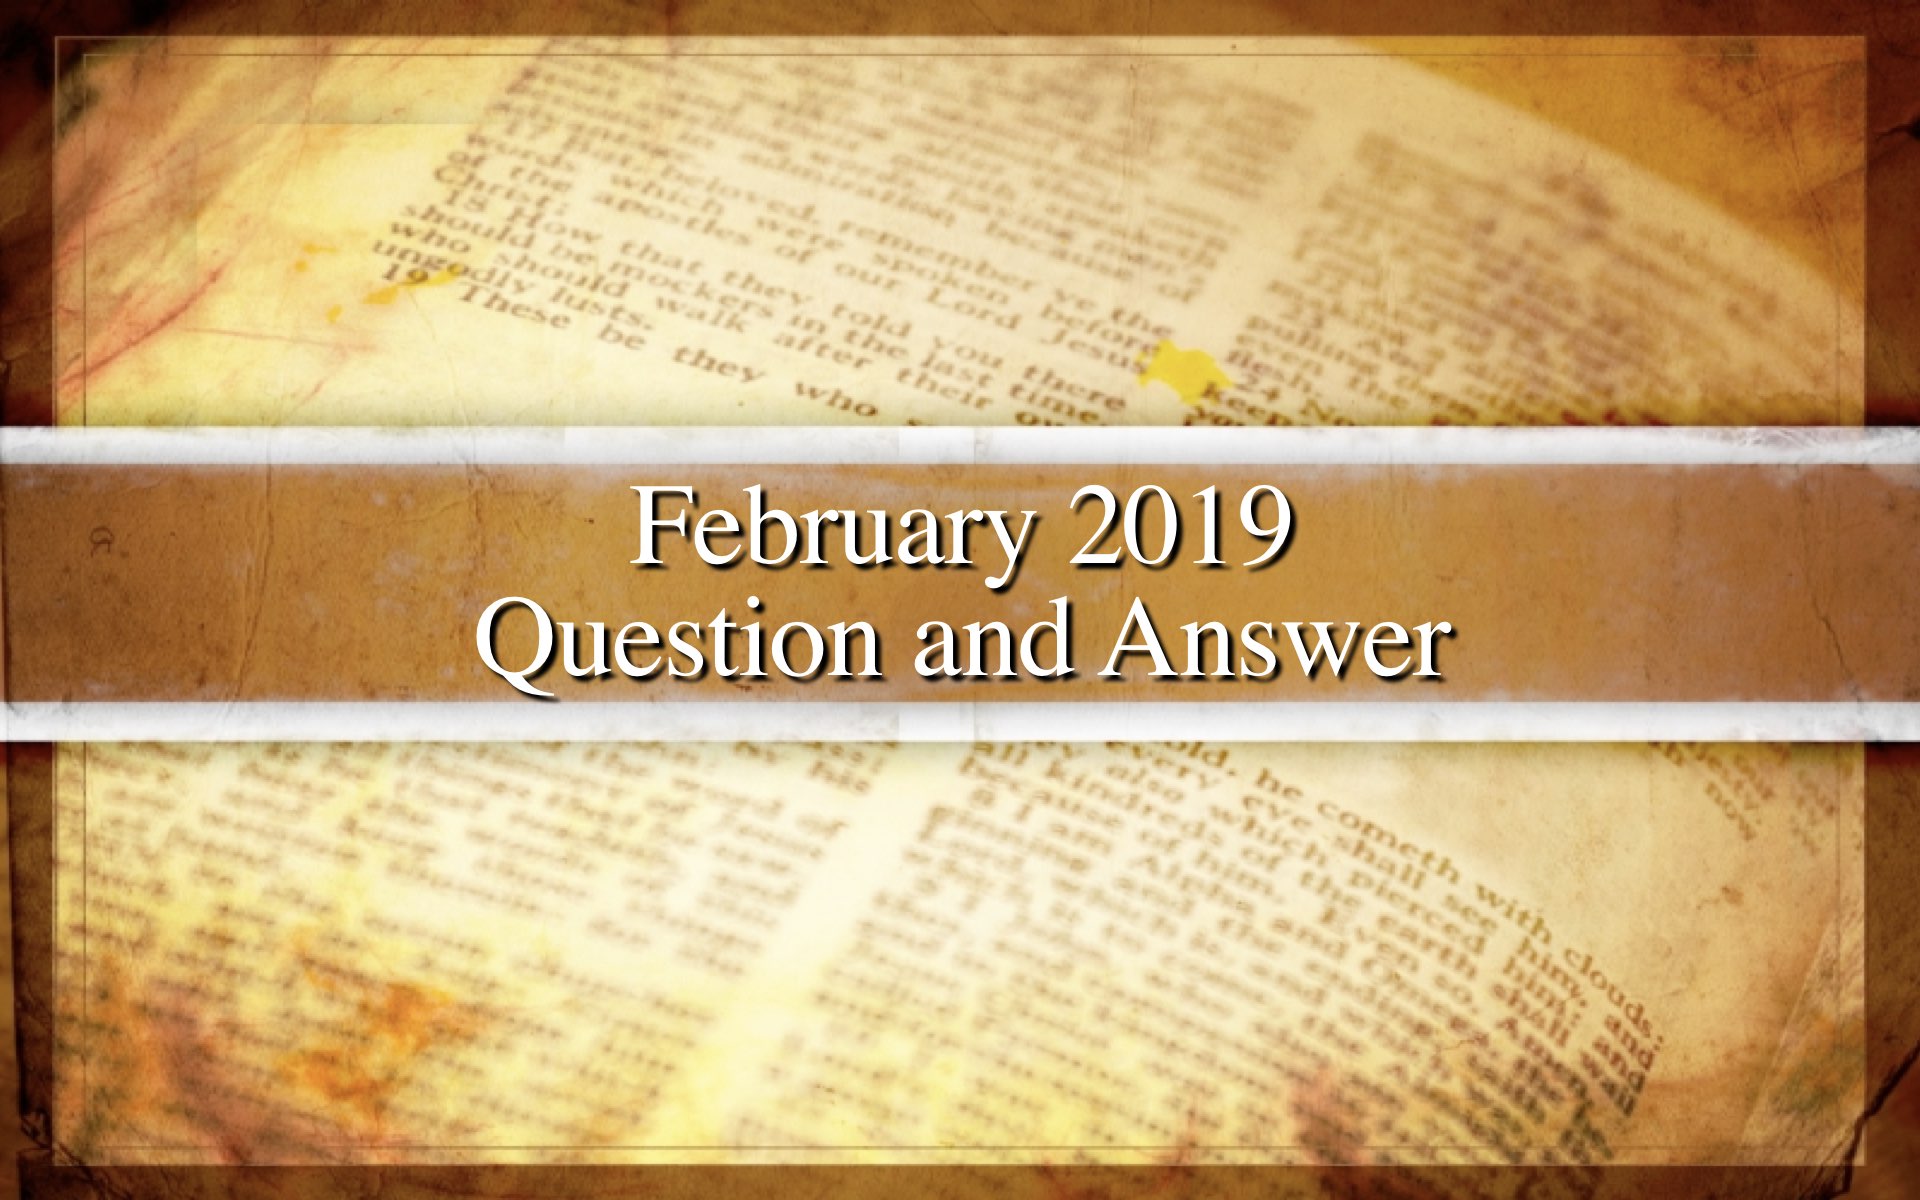 February 2019 Question and Answer